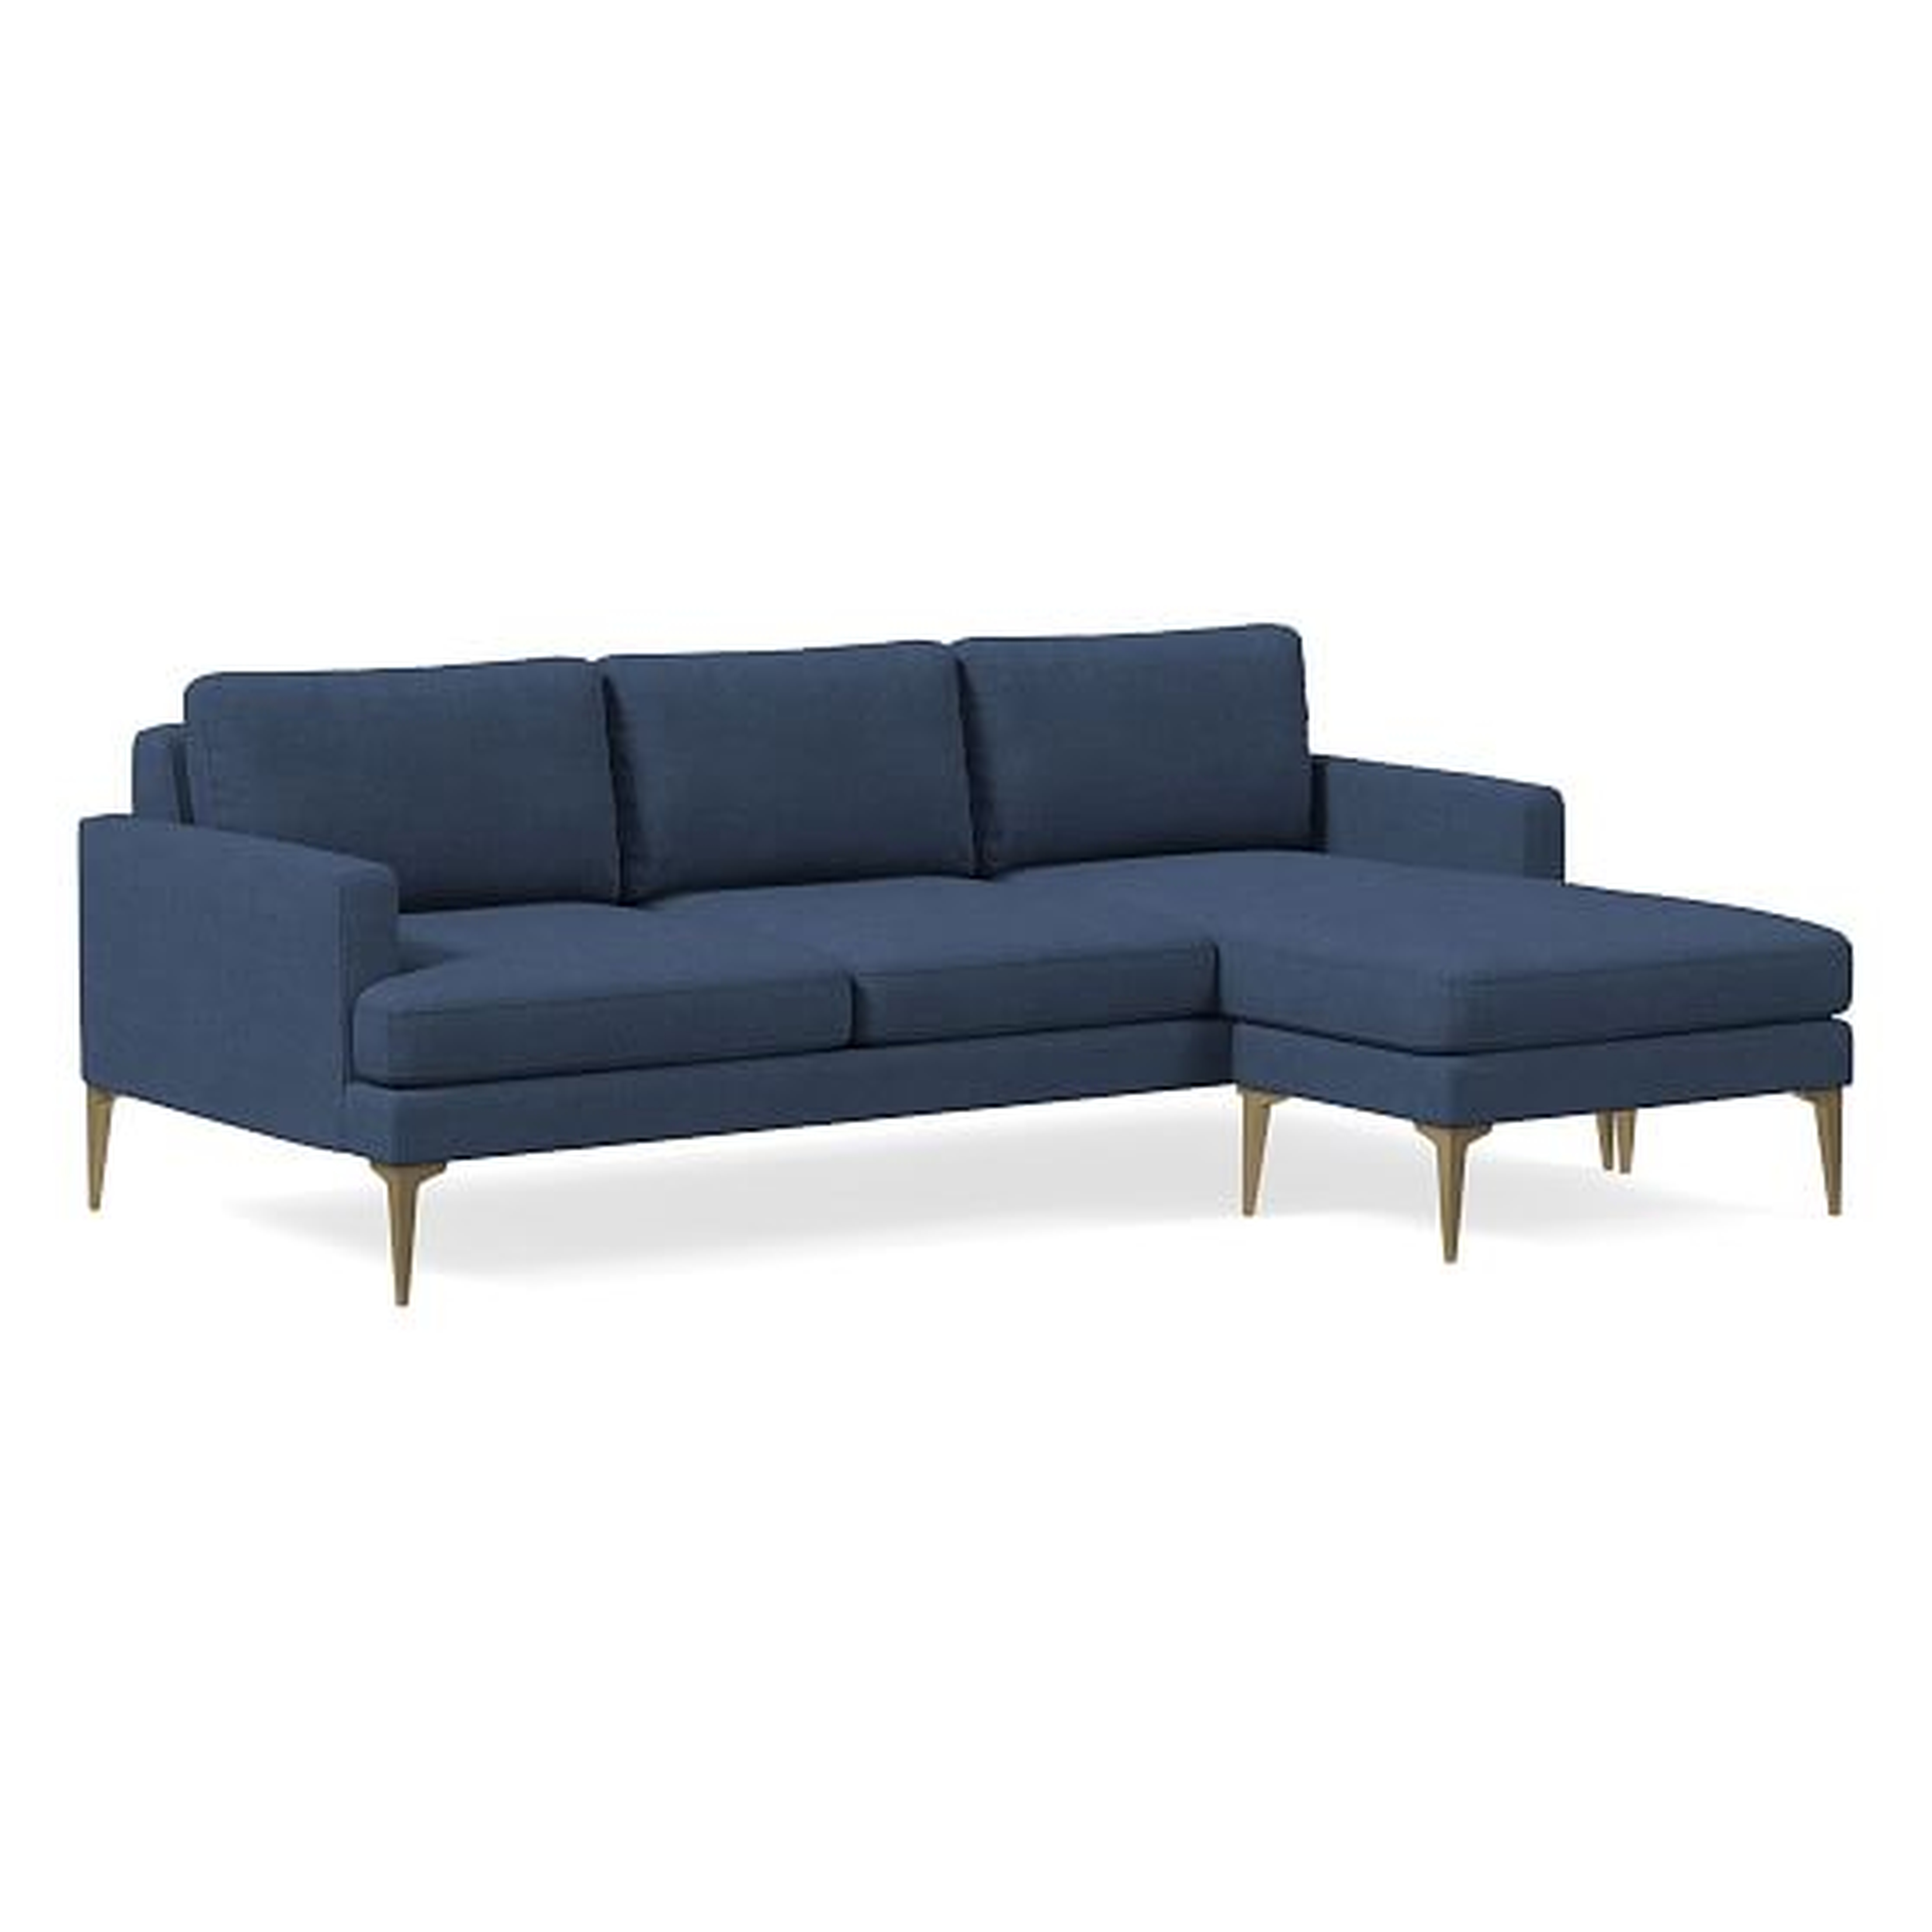 Andes Flip Sectional, Poly, Performance Yarn Dyed Linen Weave, French Blue, Blackened Brass - West Elm